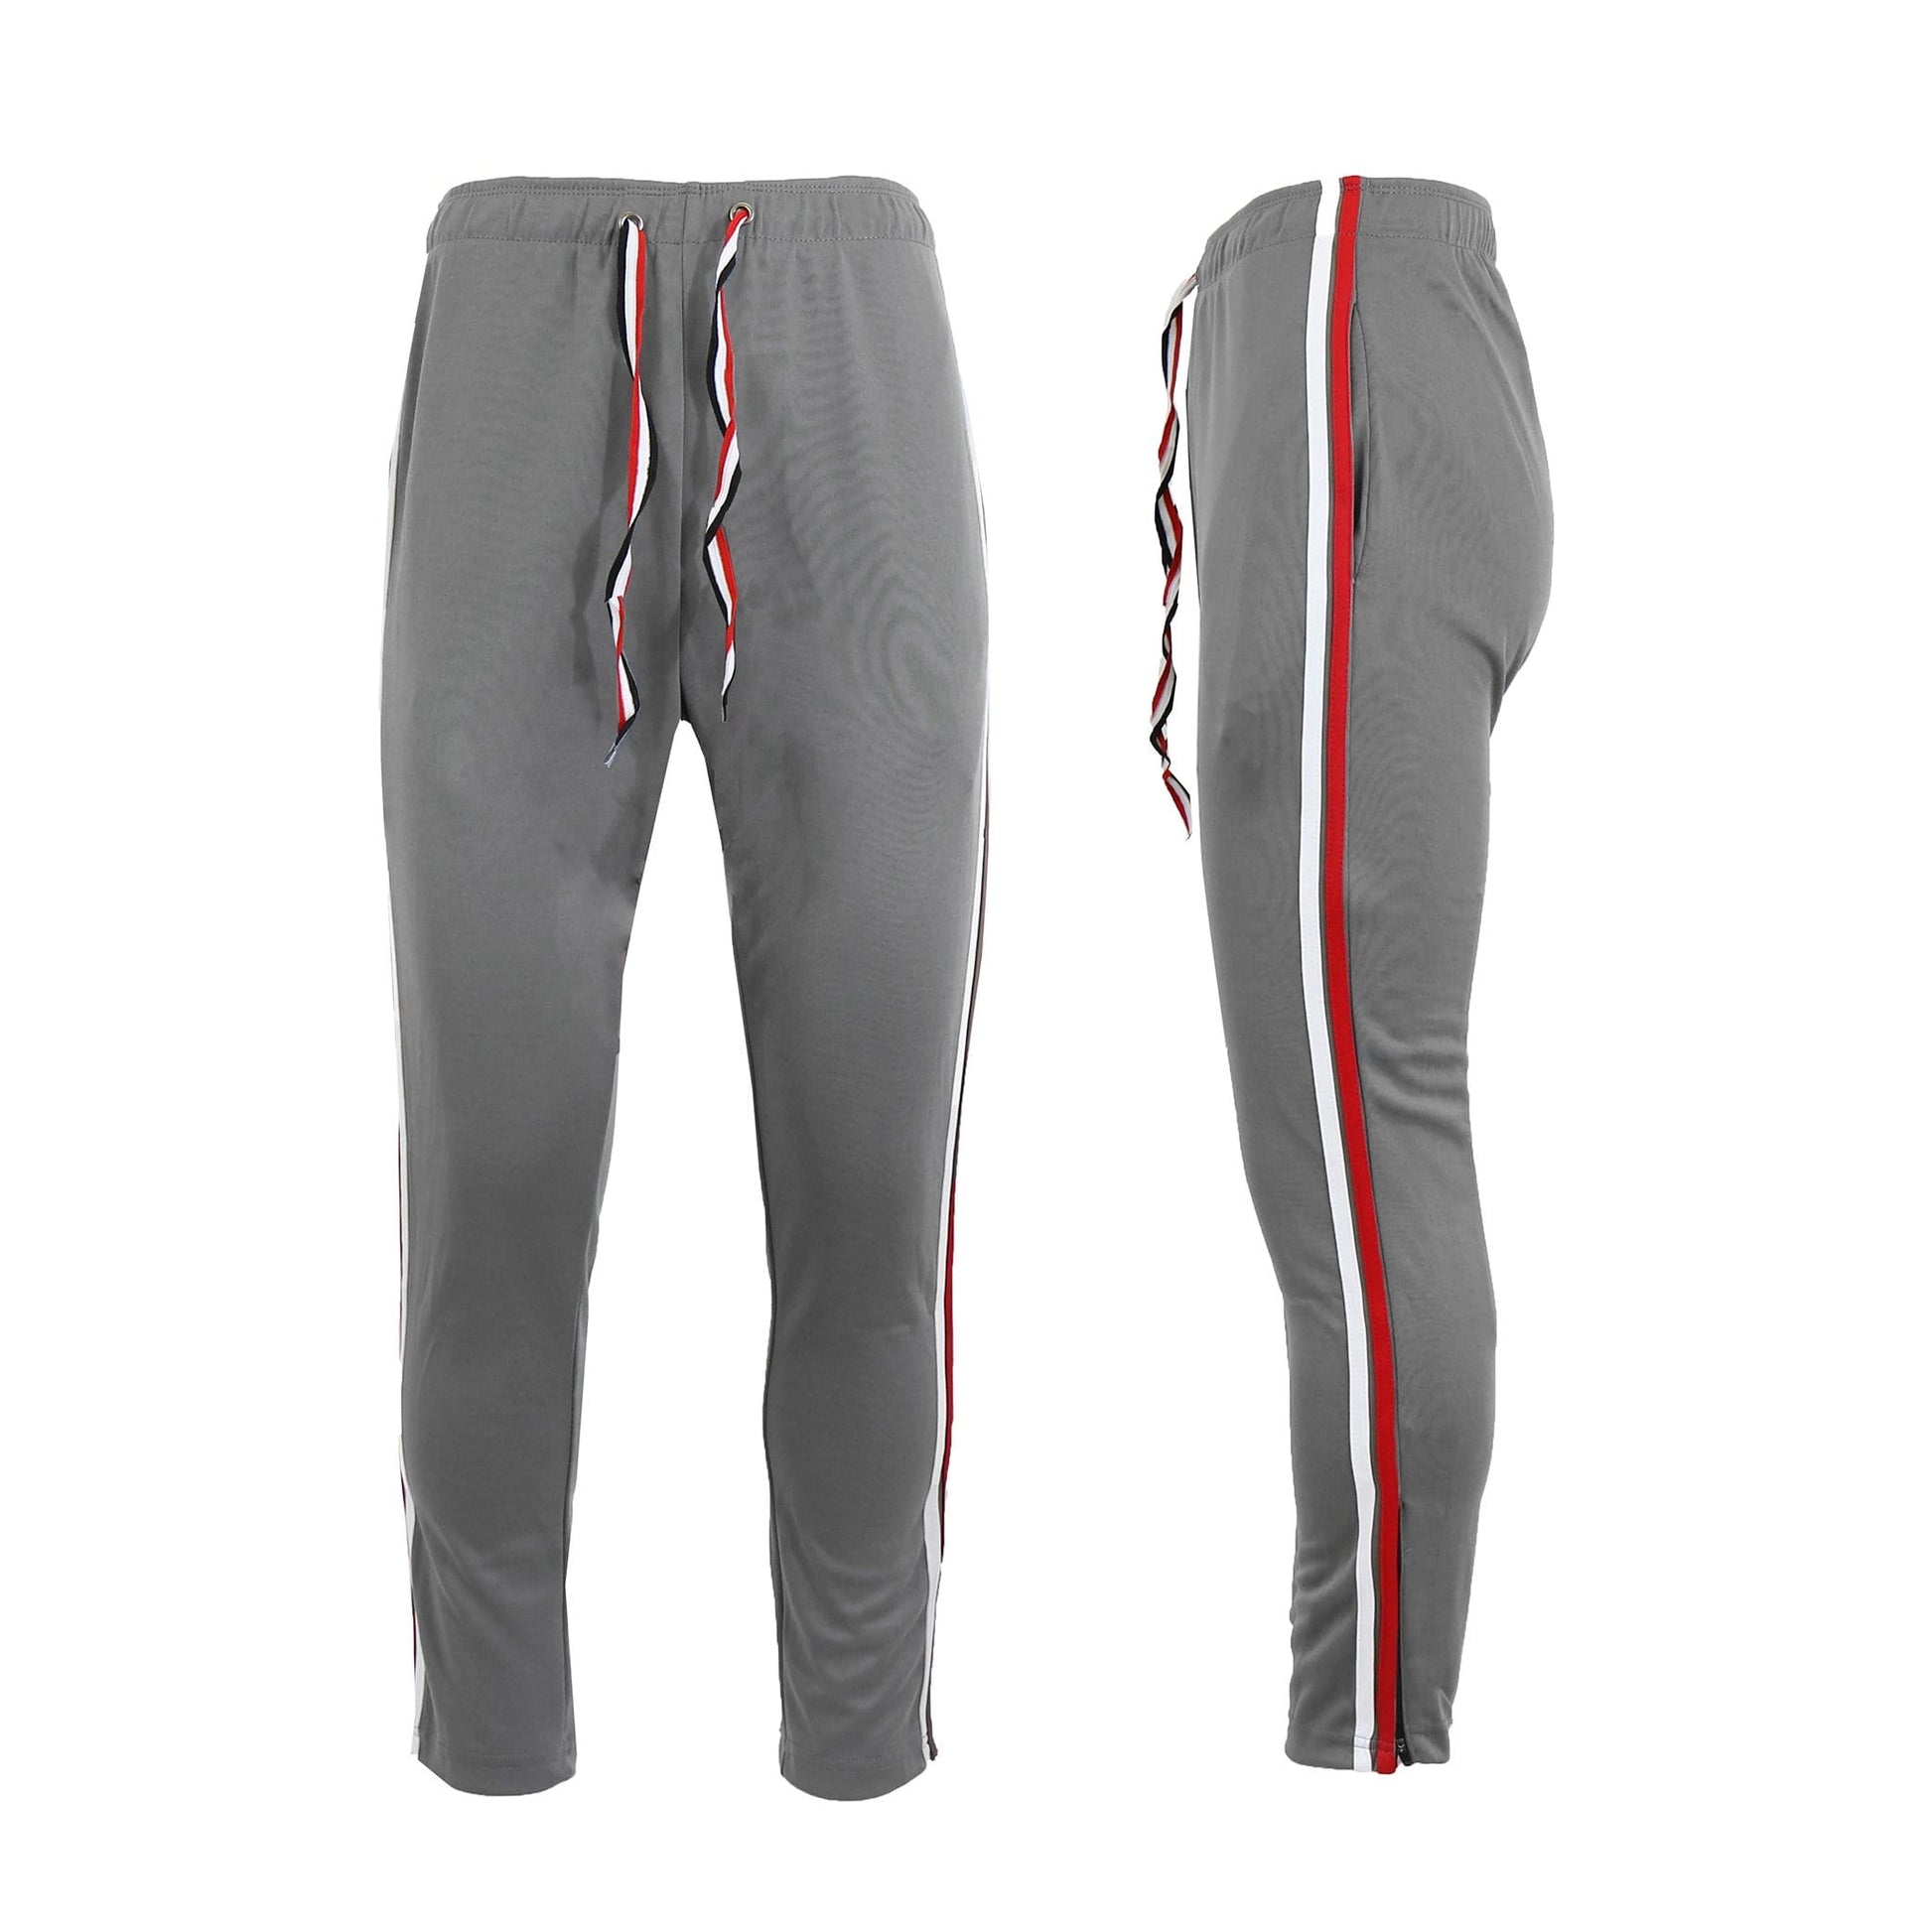 Training Pant 600 - GalaxybyHarvic